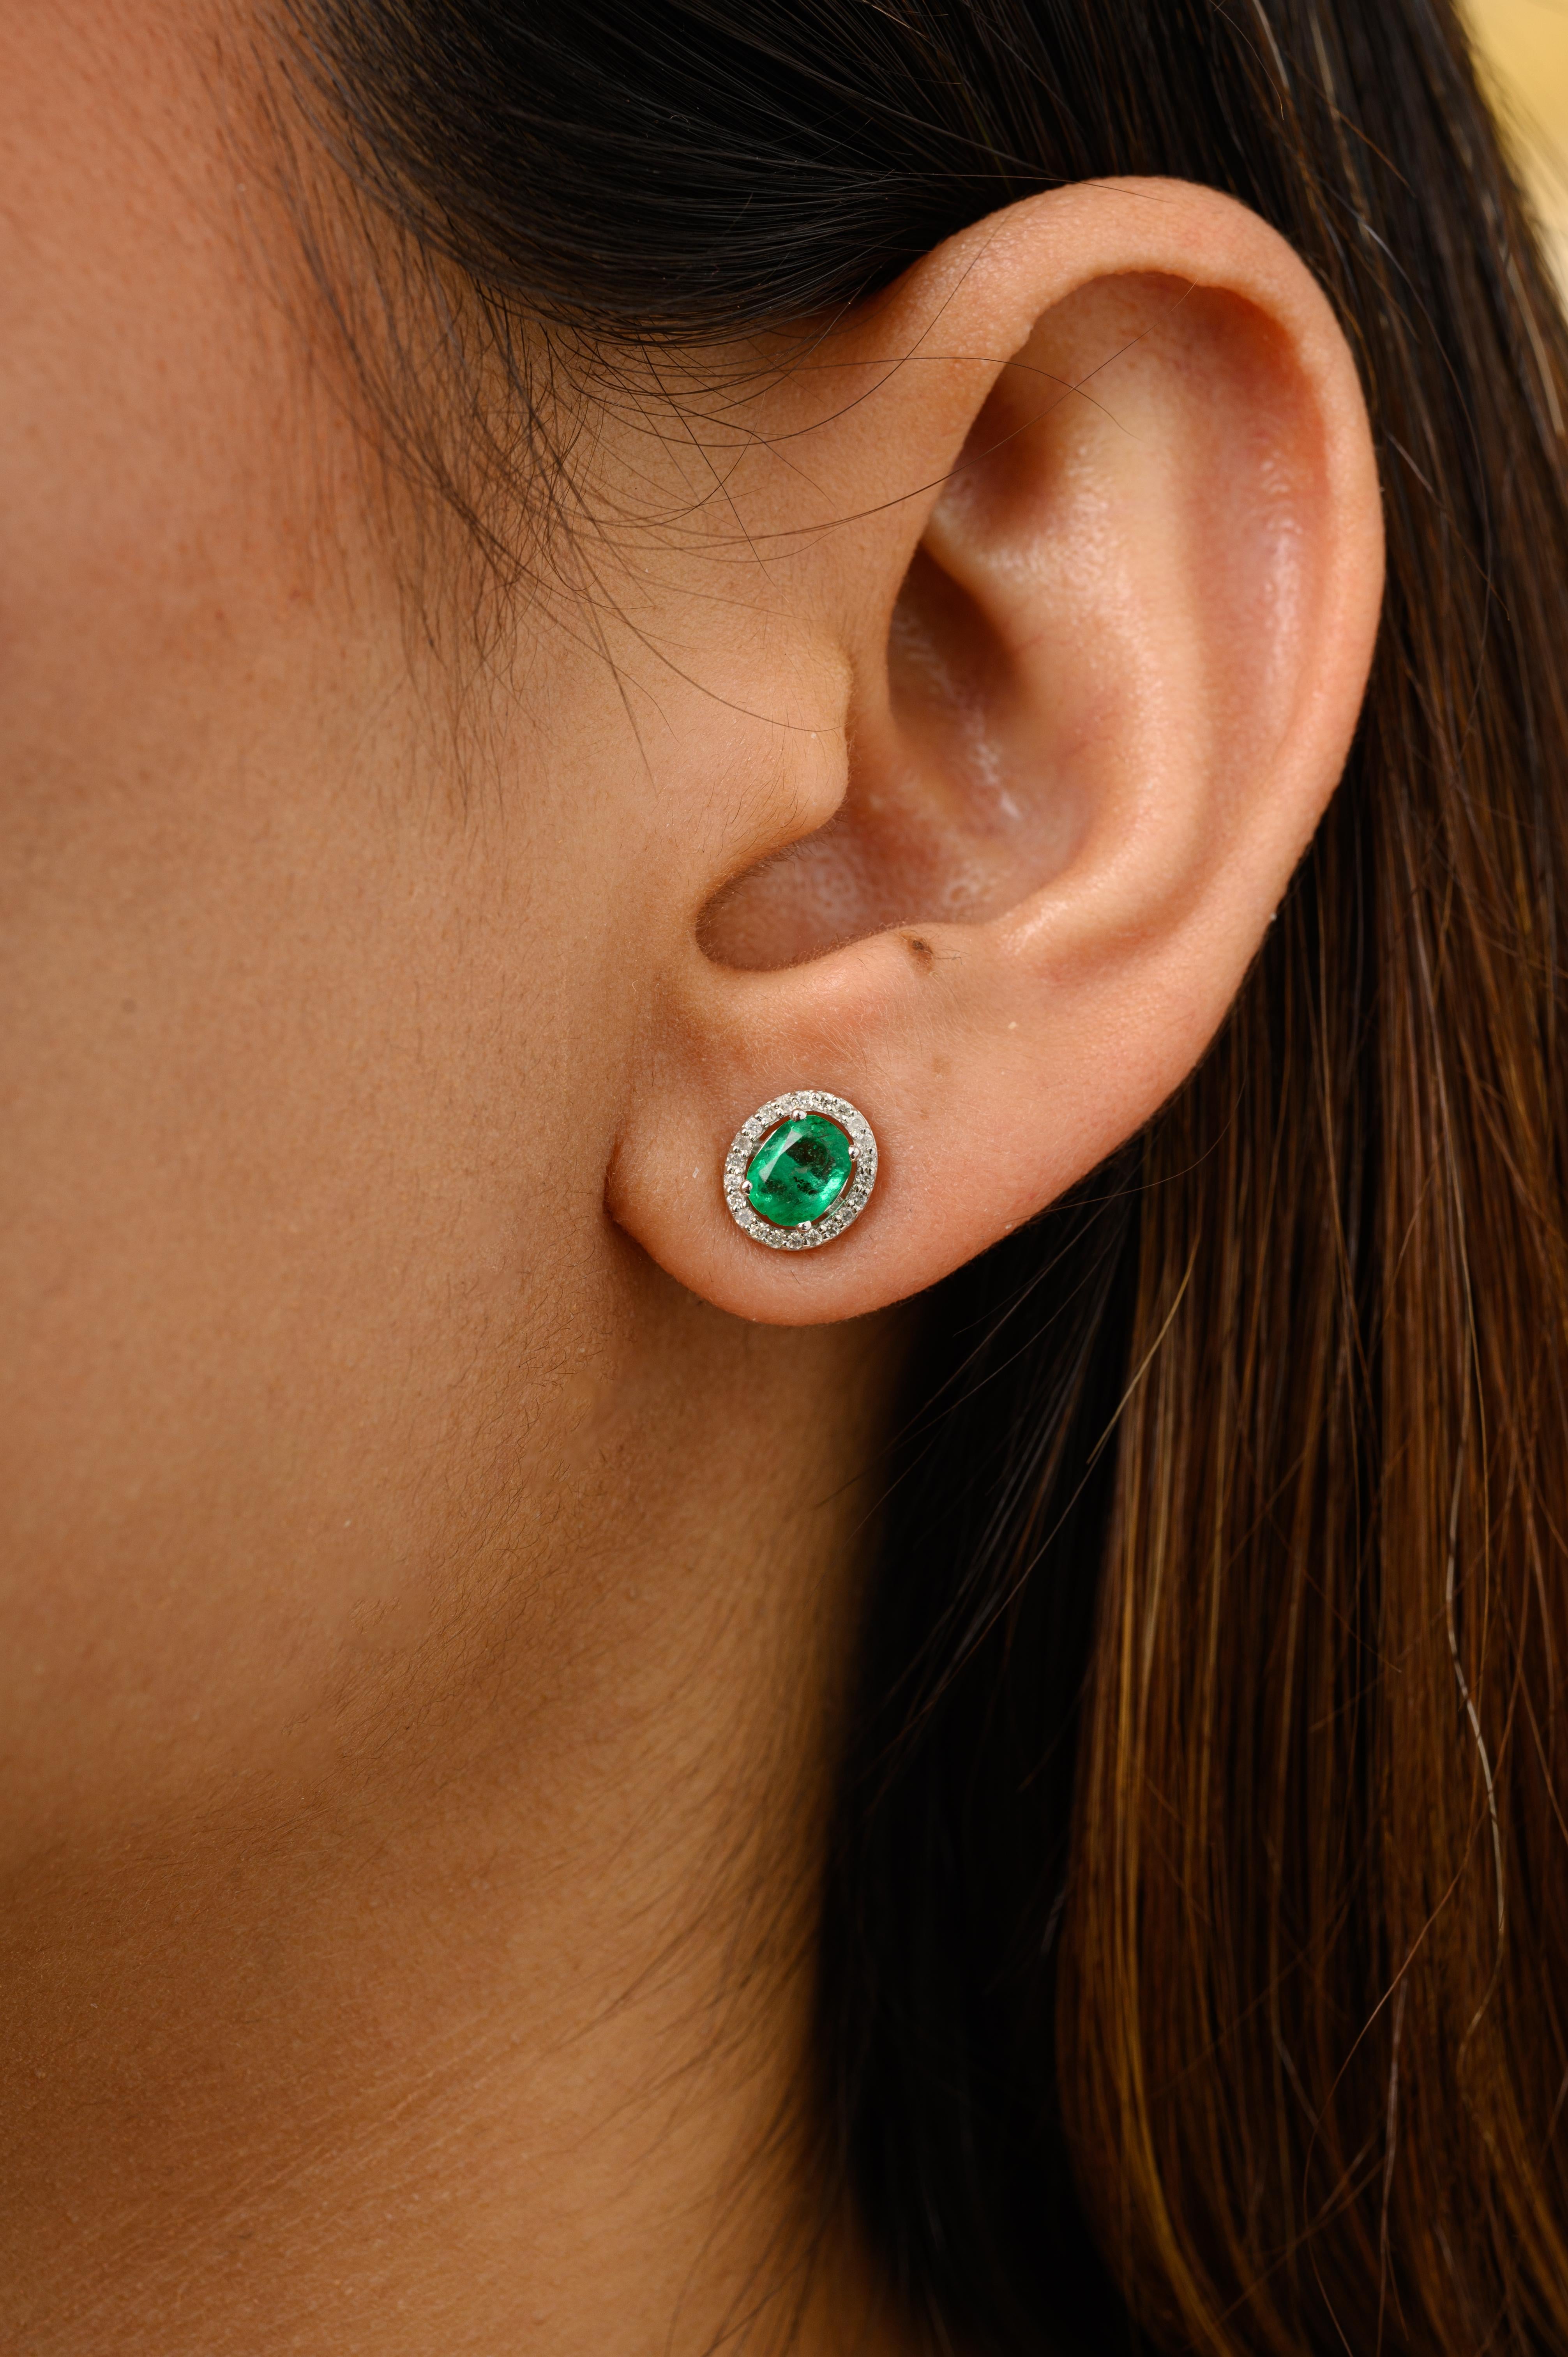 Natural Emerald Diamond Halo Oval Stud Earrings Gift for Mom in 14K Gold to make a statement with your look. You shall need stud earrings to make a statement with your look. These earrings create a sparkling, luxurious look featuring oval cut